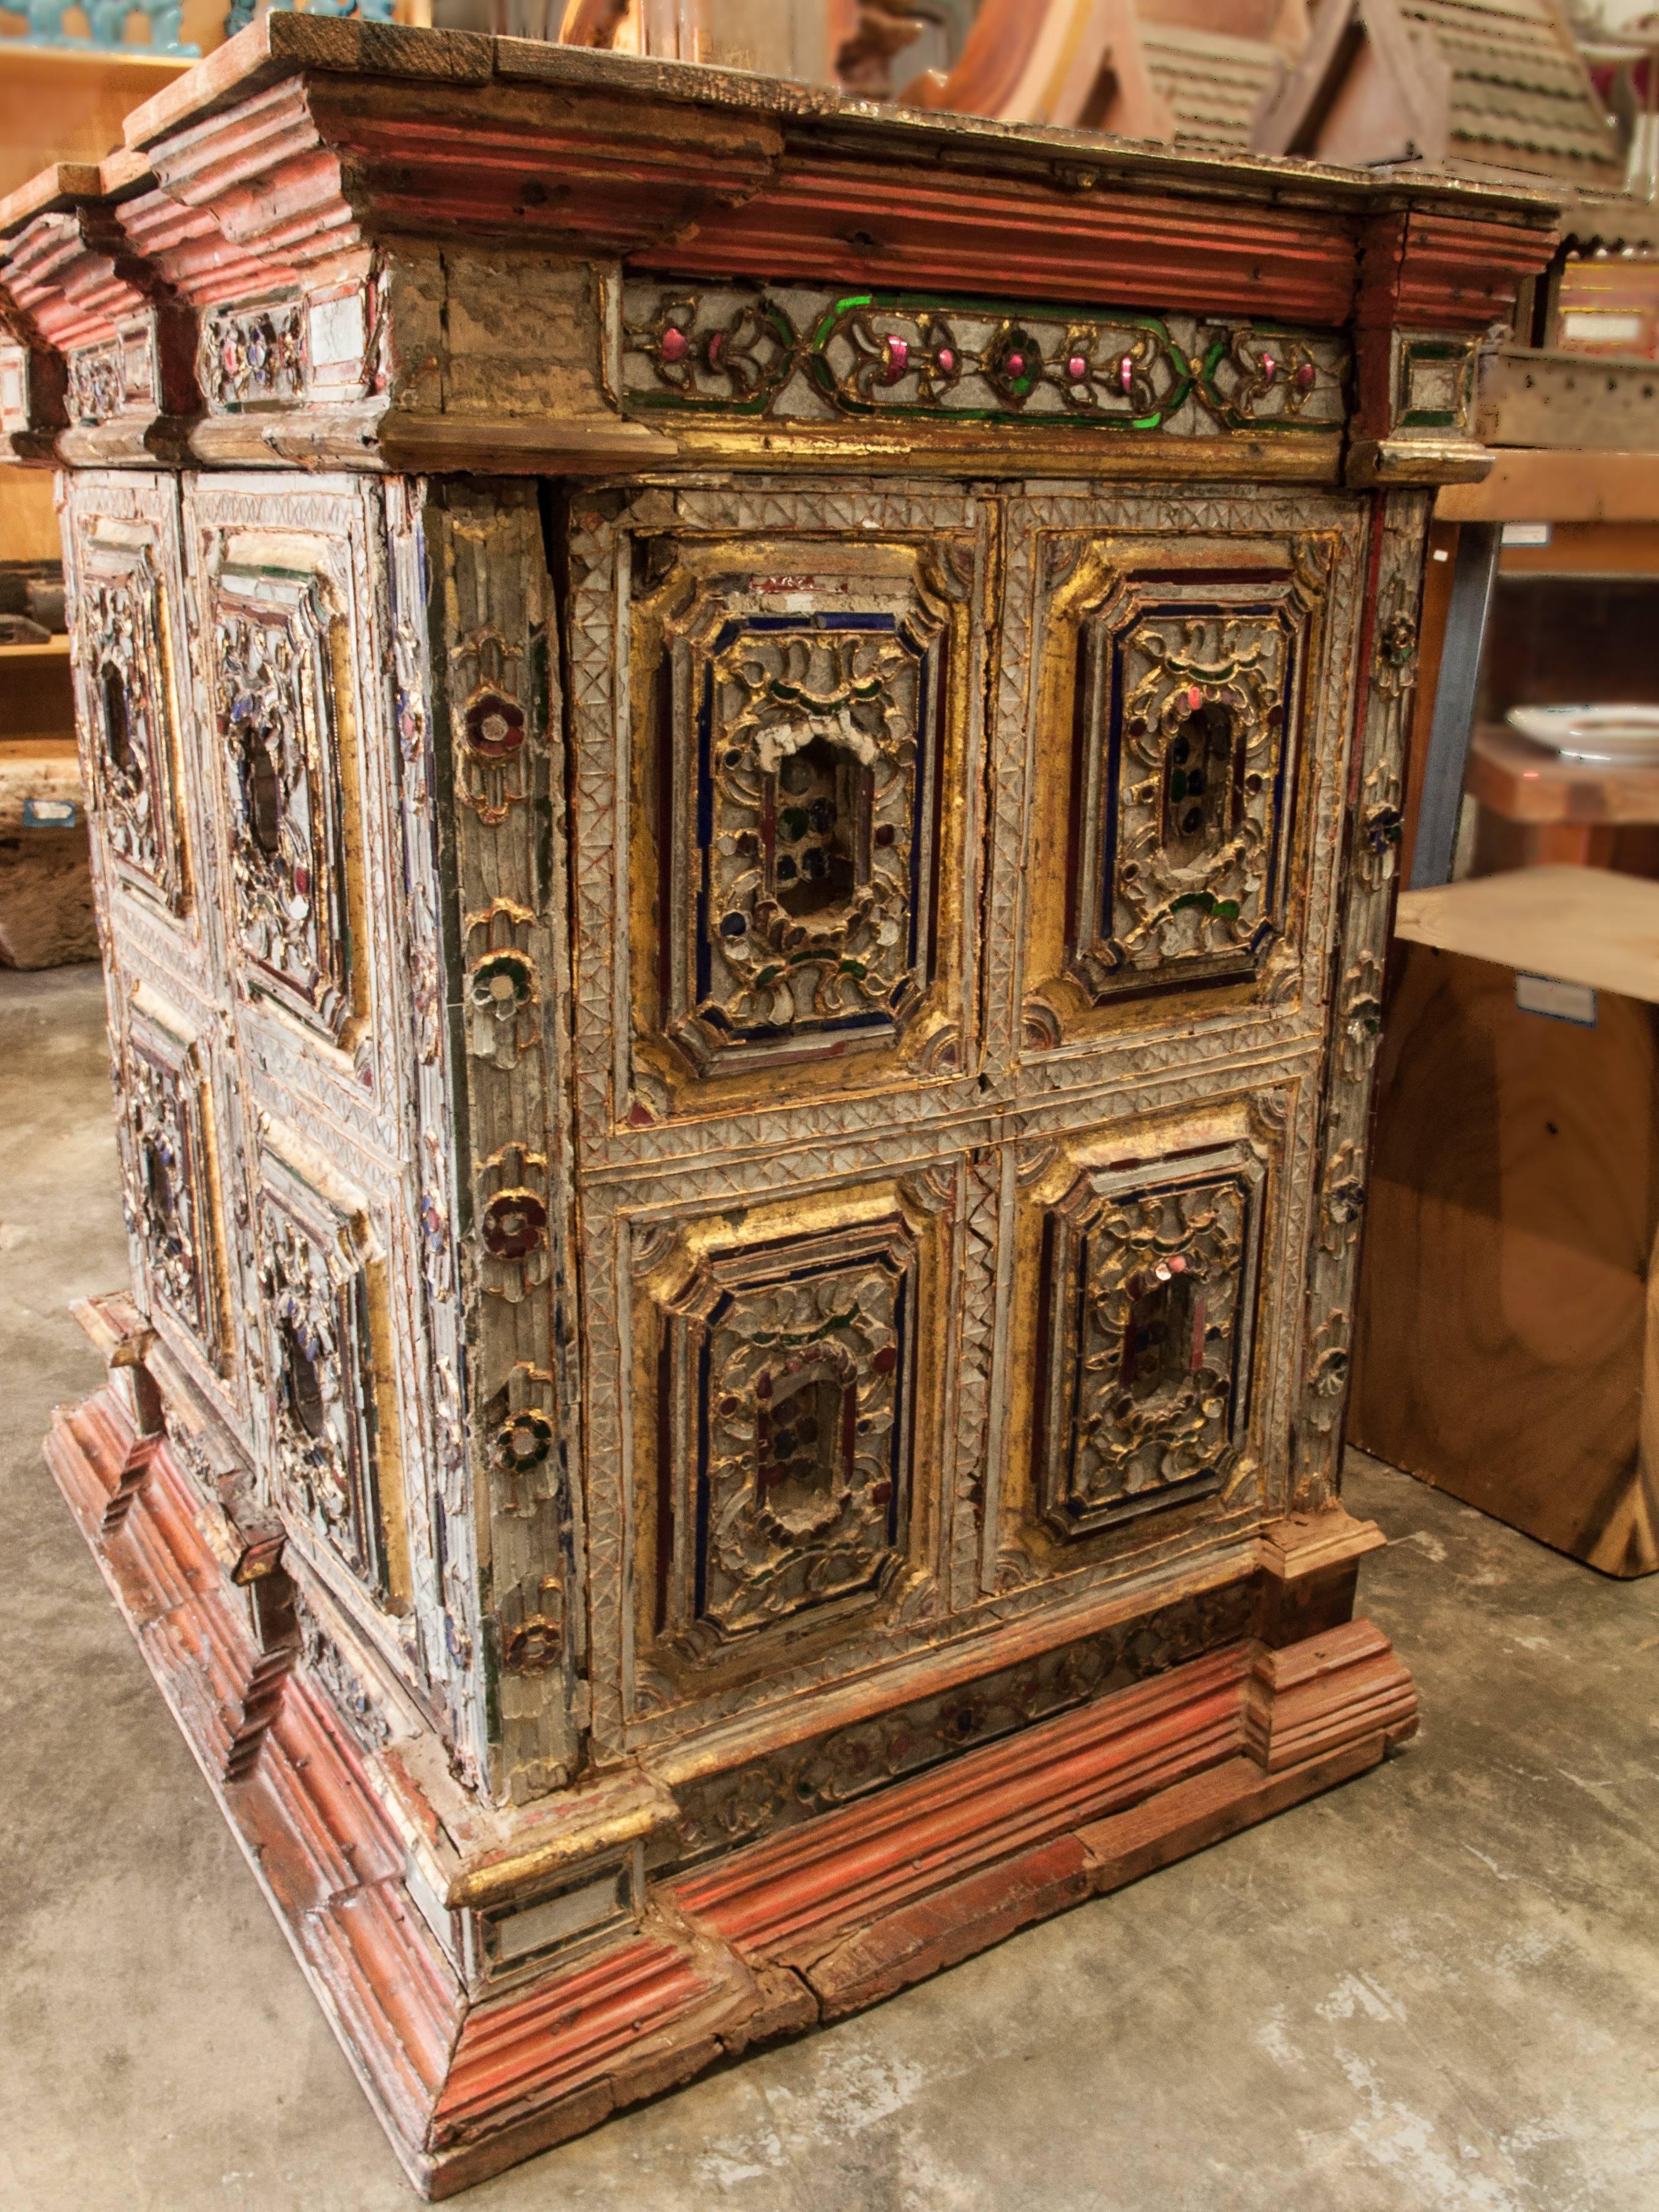 Hand-Crafted Buddhist Teak Scripture Cabinet from Burma with Inlay Glass, Early 20th Century